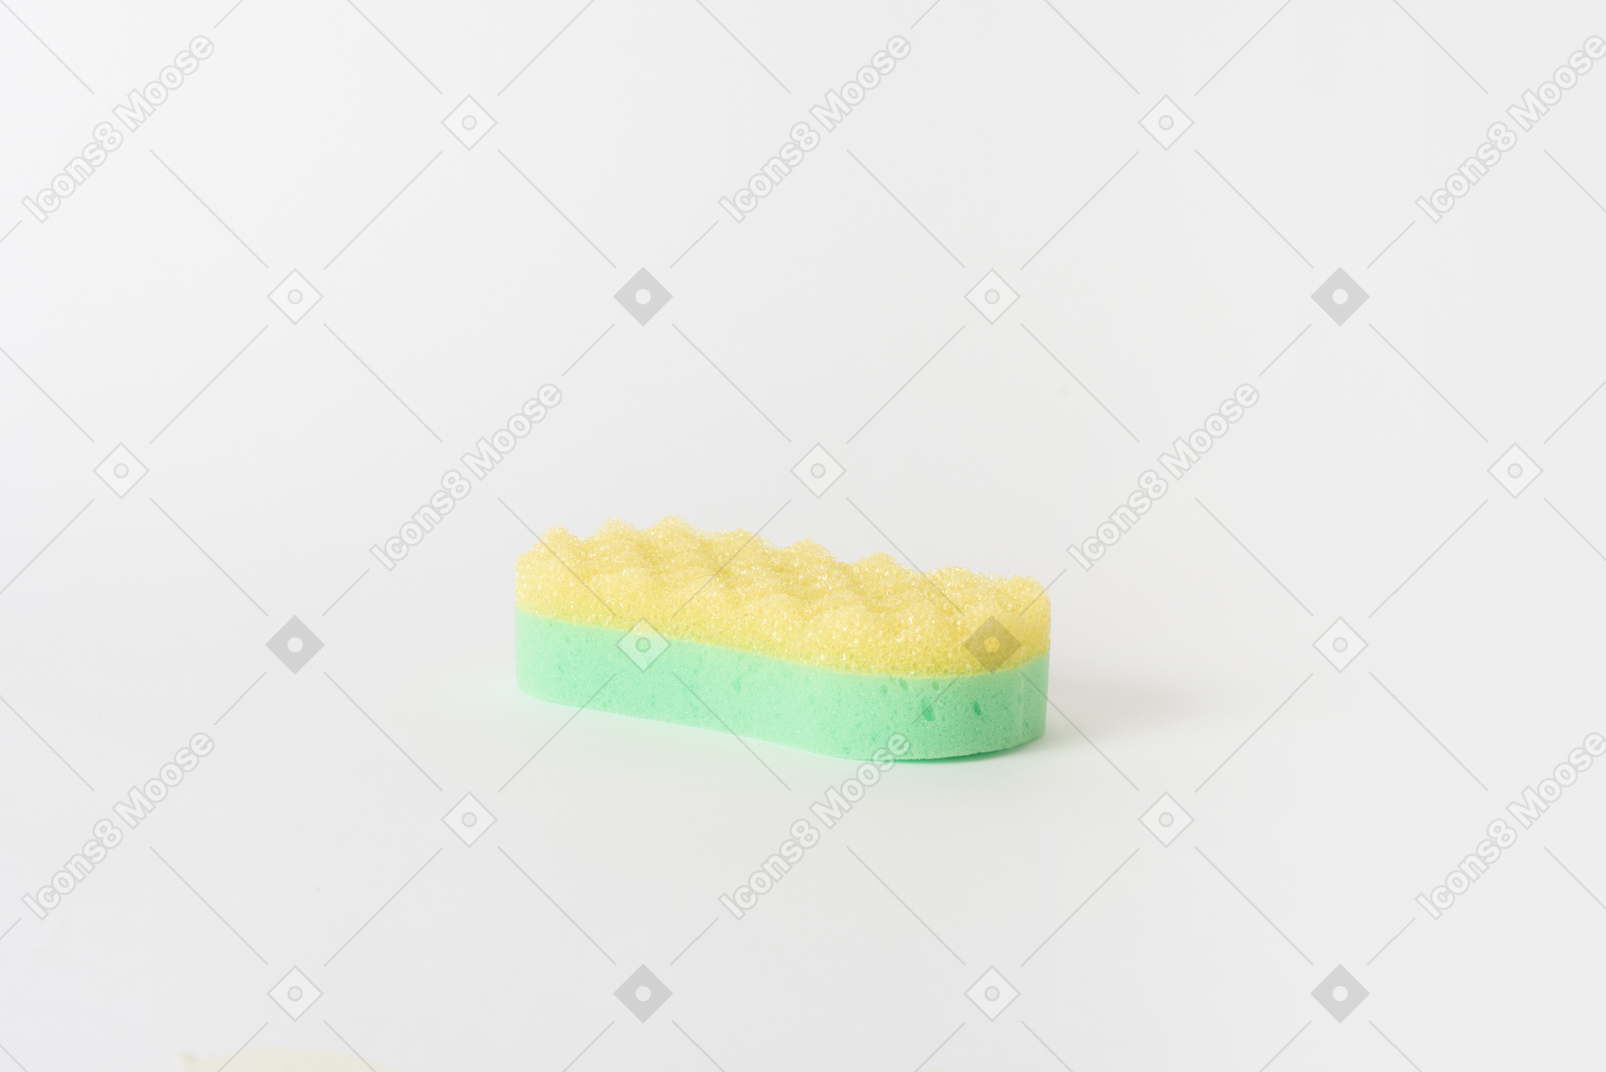 Bath cleaning is easy with this sponge